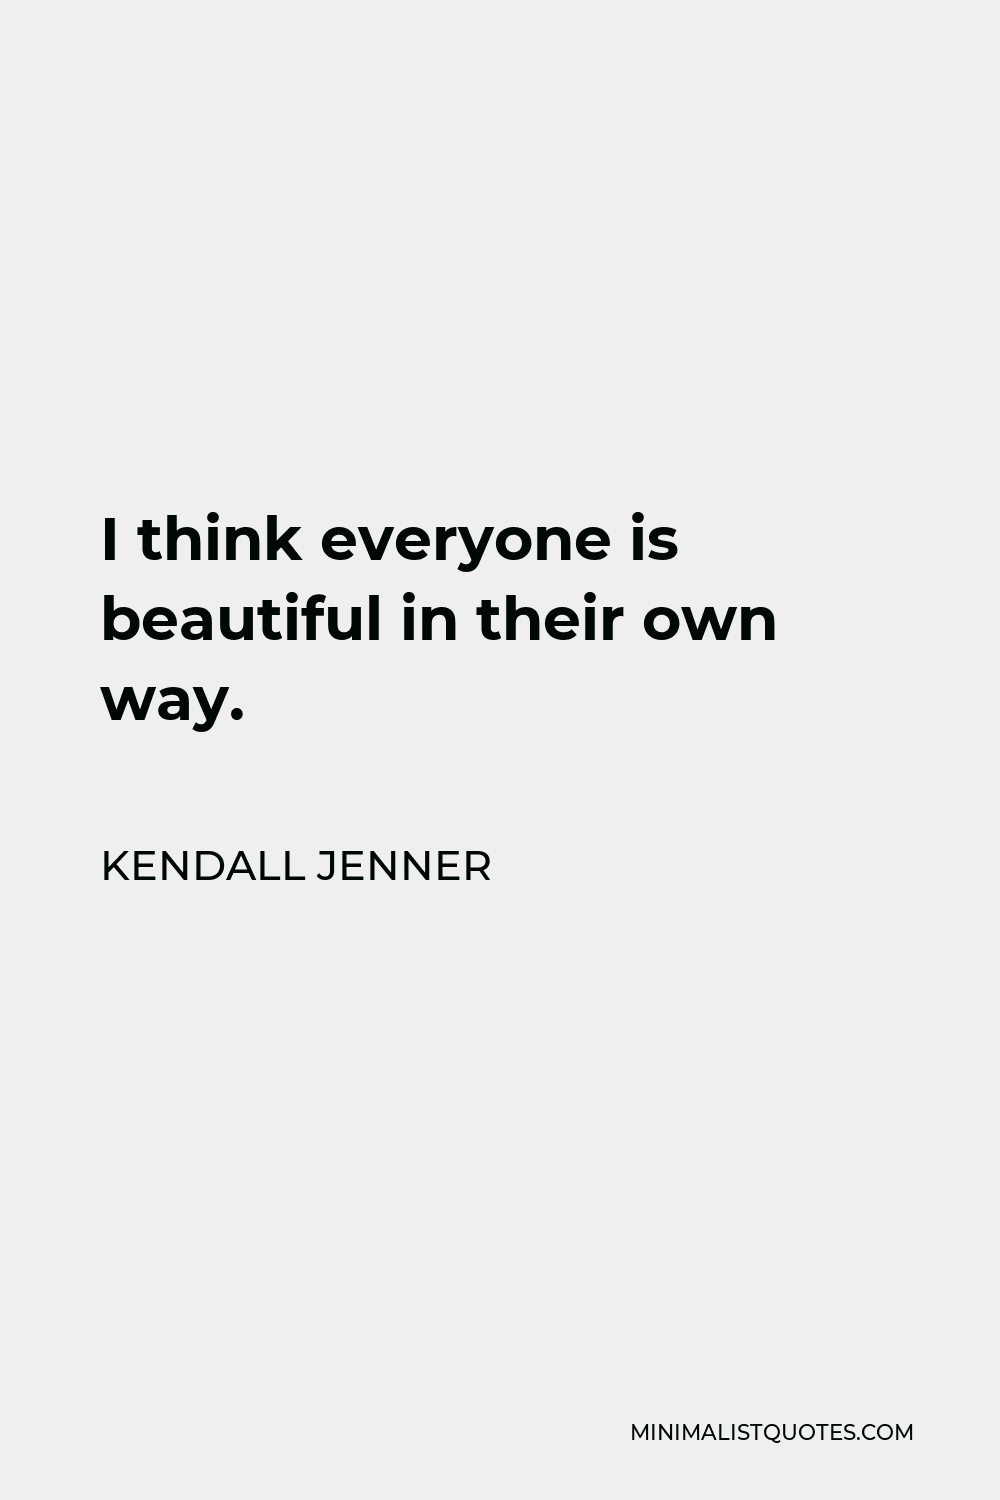 Kendall Jenner Quote - I think everyone is beautiful in their own way.